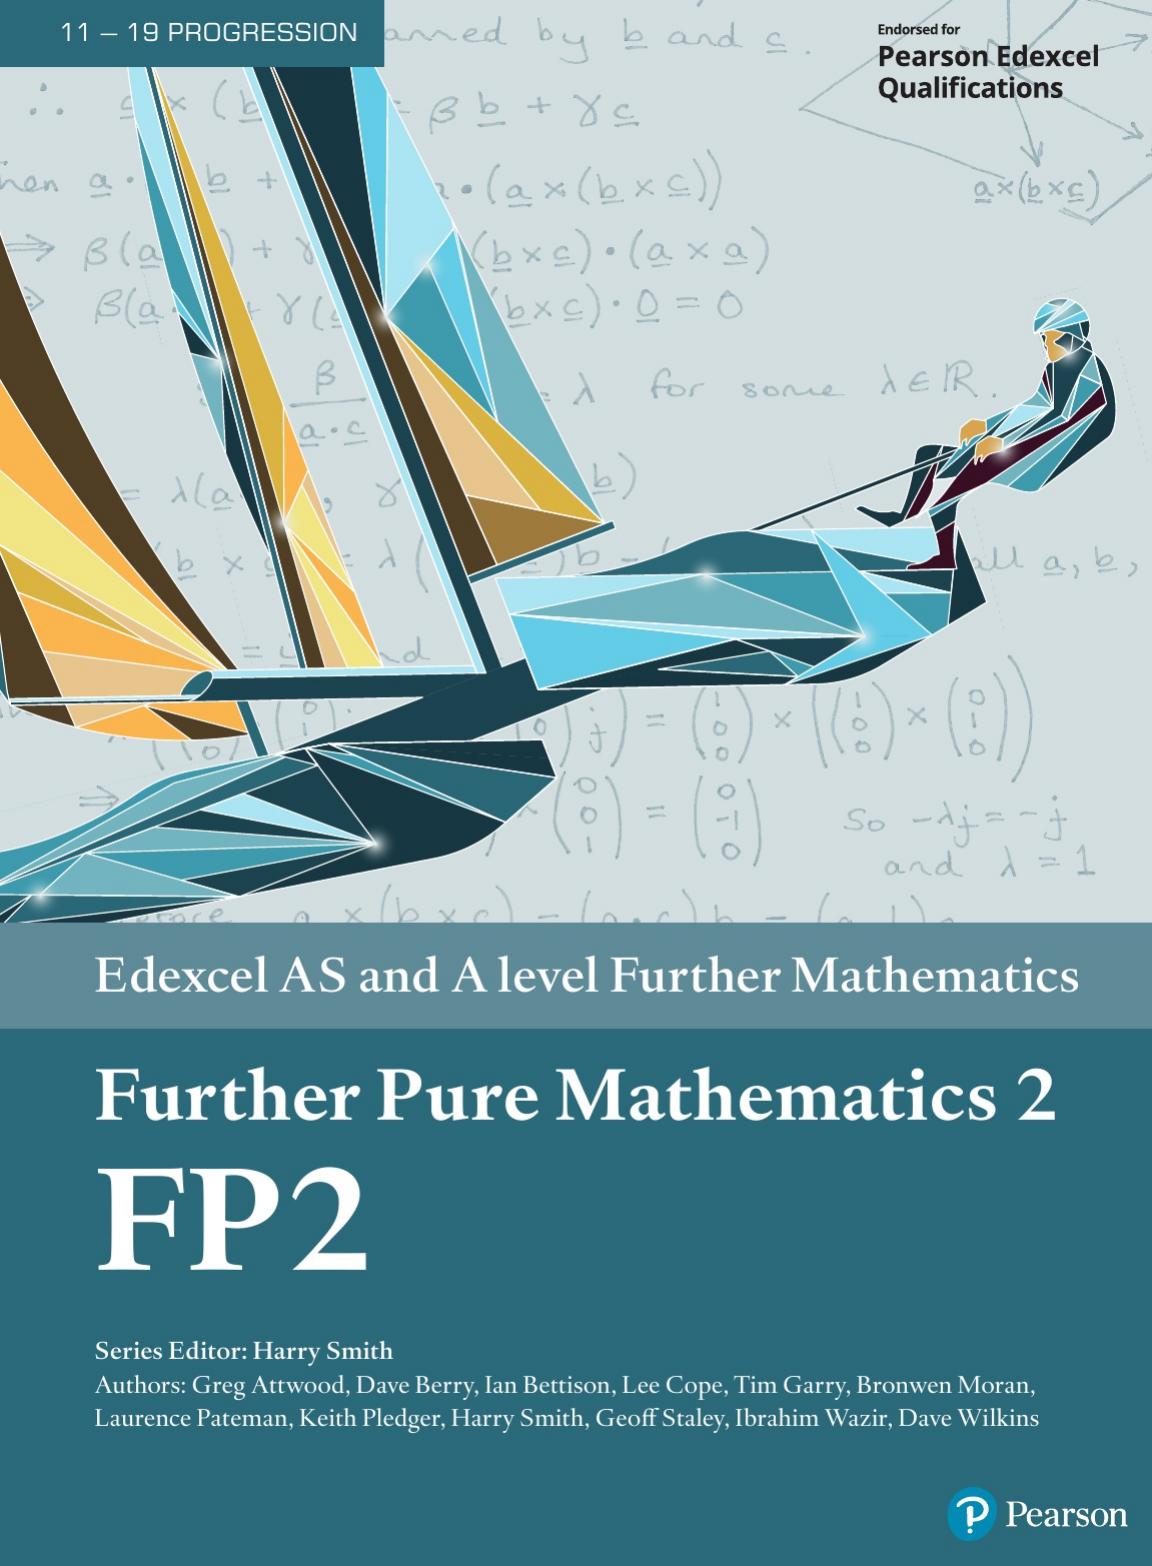 Edexcel AS and A level Further Mathematics Further Pure Mathematics 2 by coll.